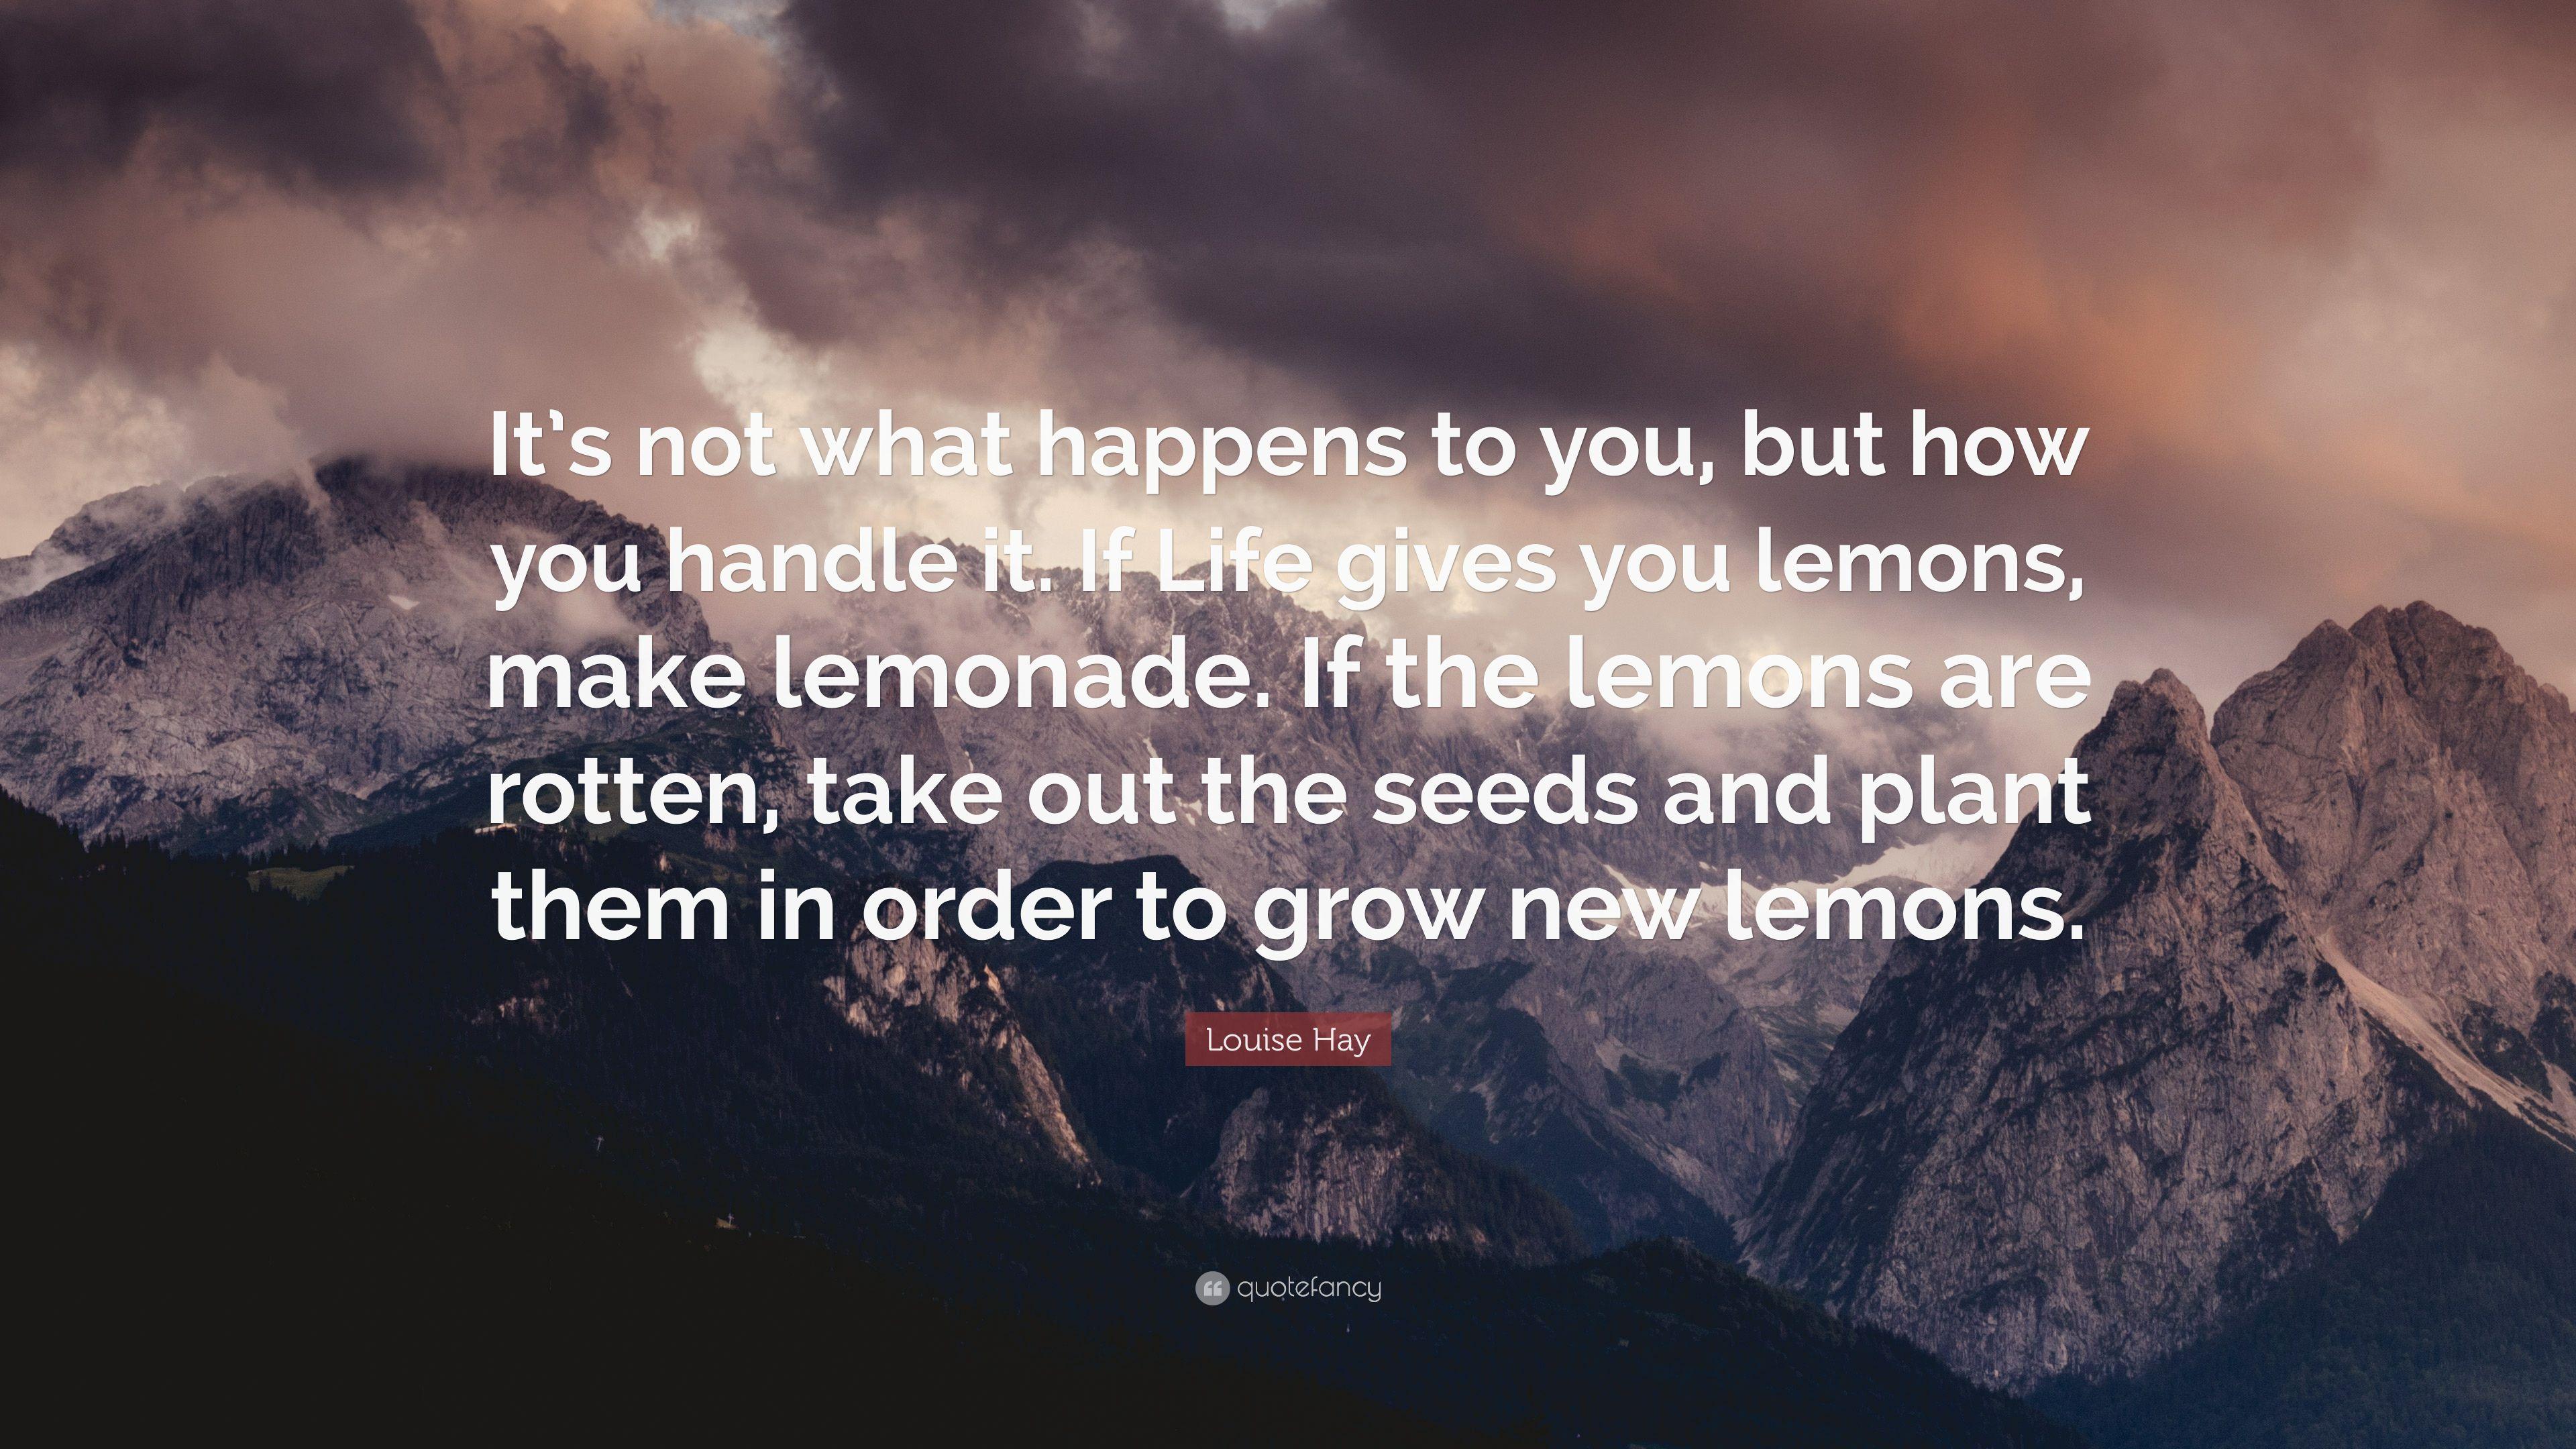 Louise Hay Quote: “It's not what happens to you, but how you handle